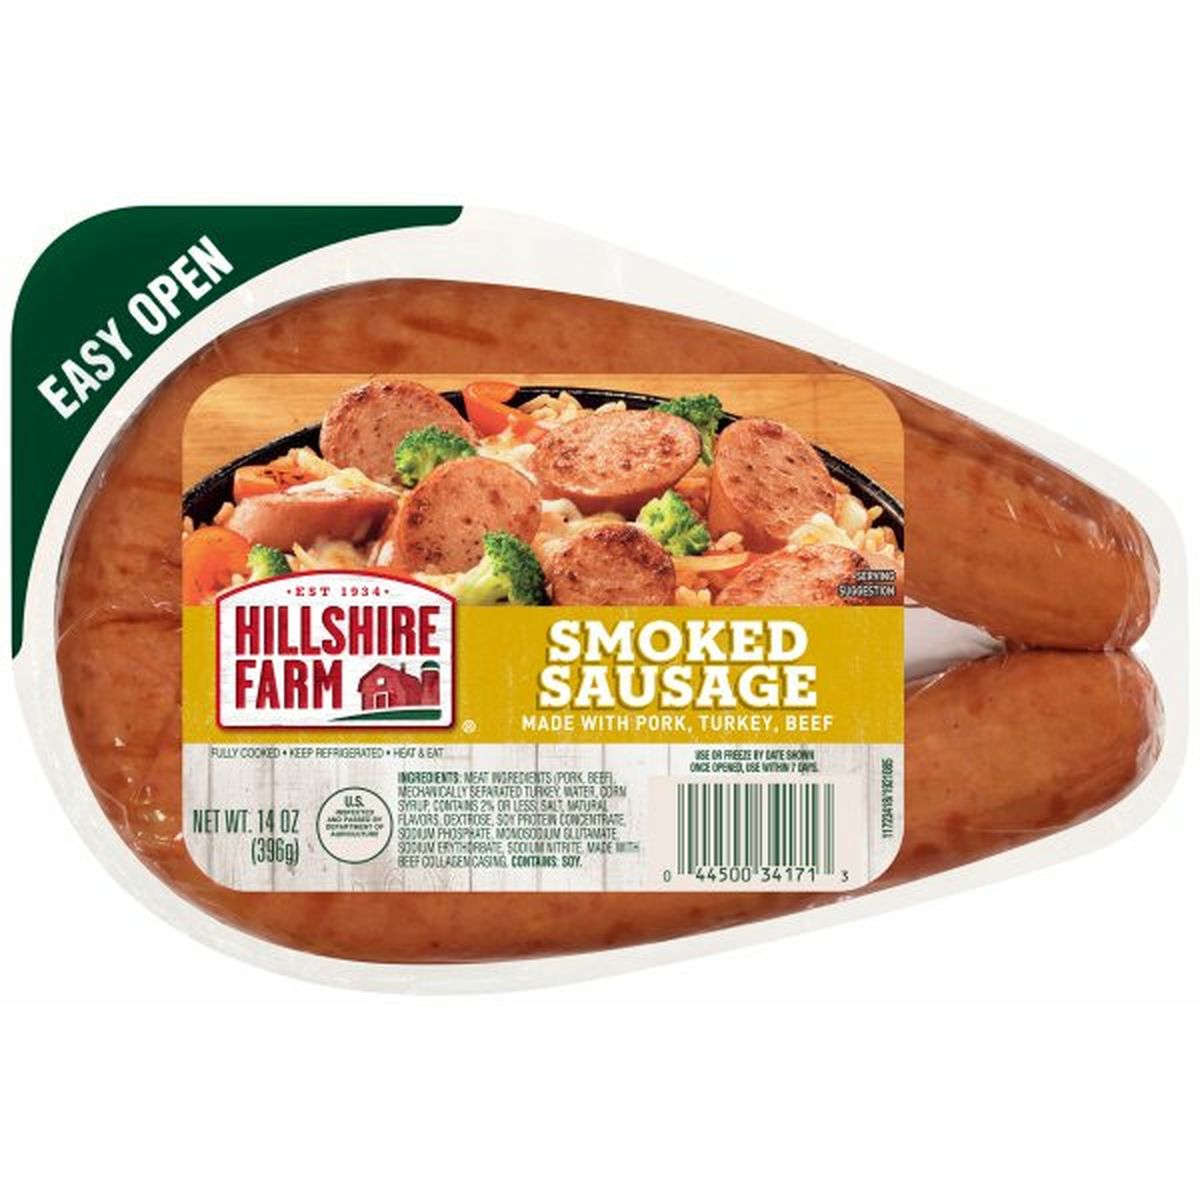 Calories in Hillshire Farm Smoked Sausage